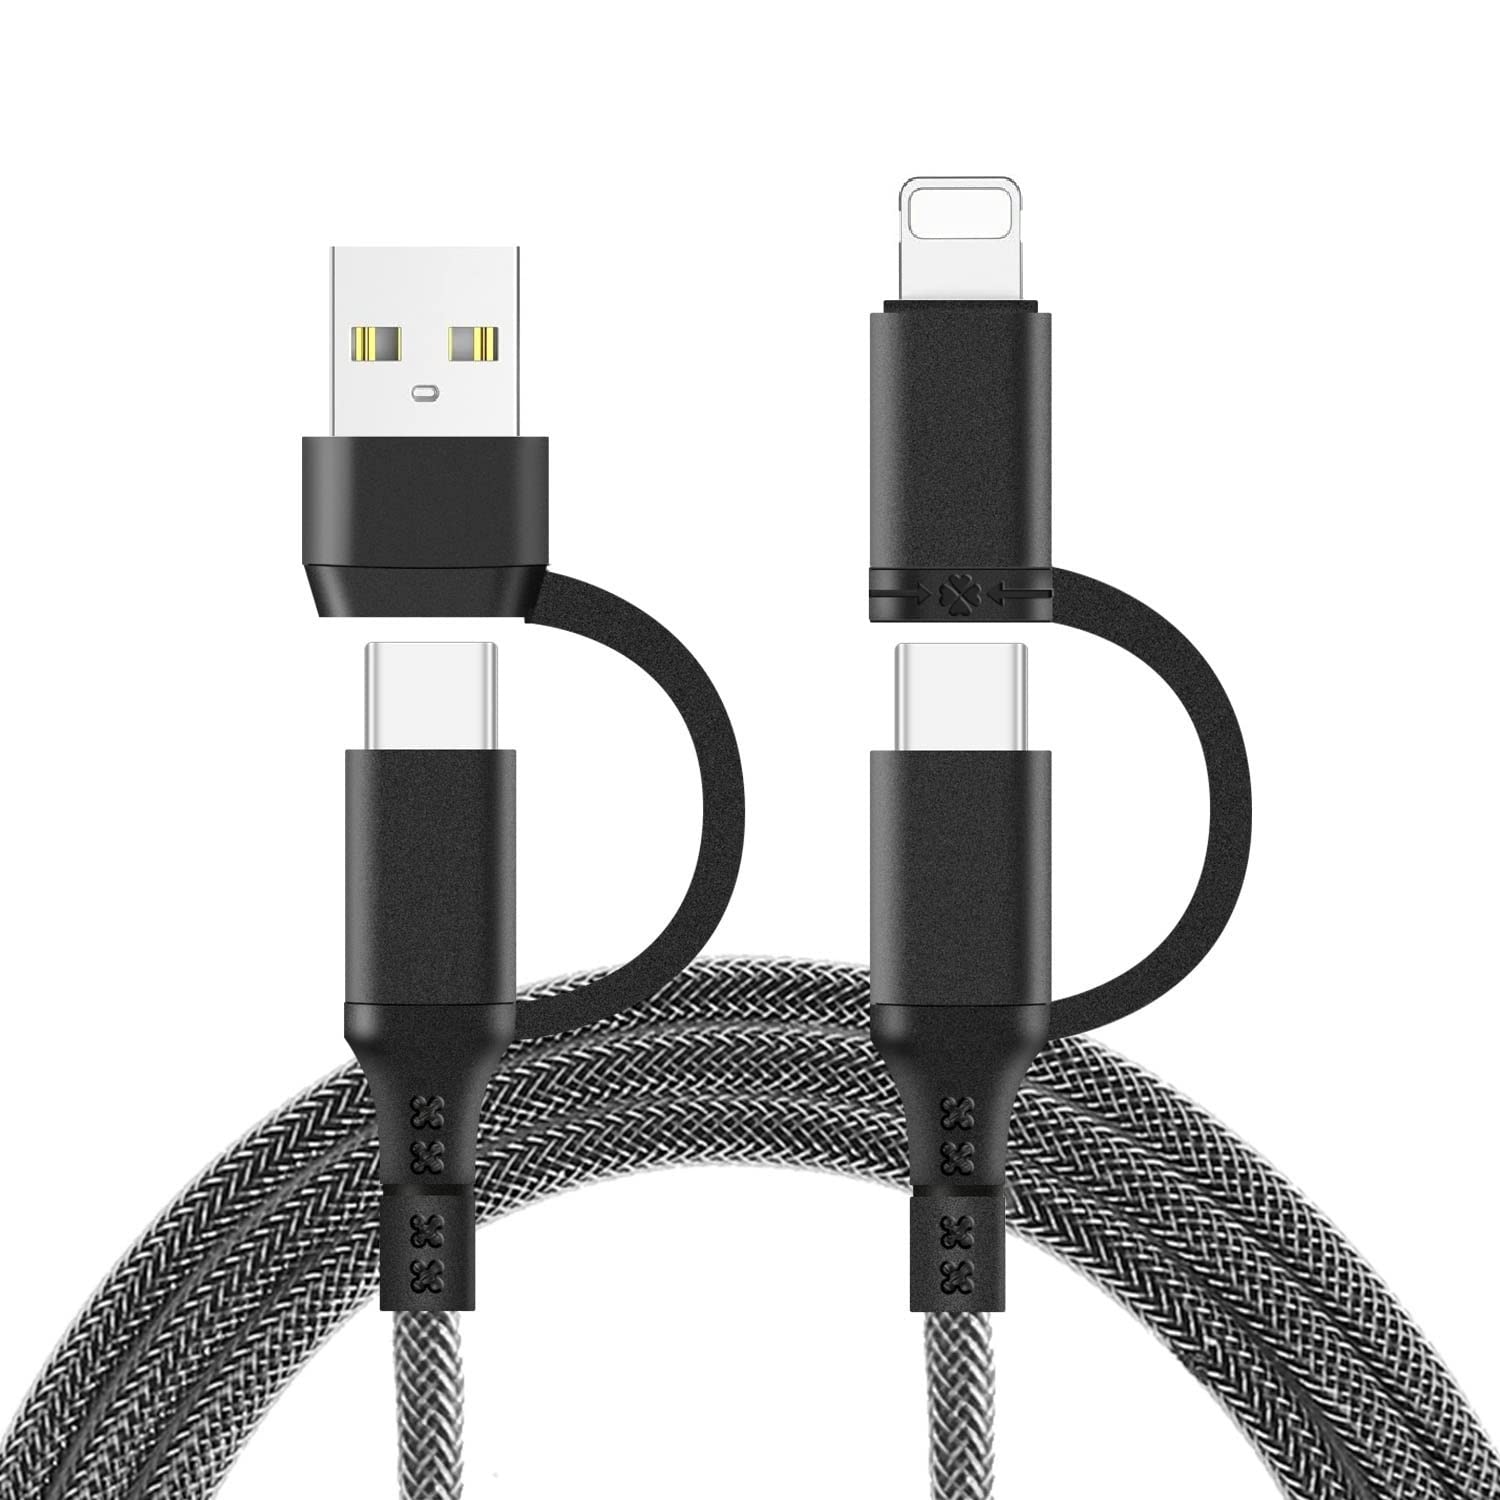 SOOPII USB C to USB C Cable 60W, 2Pack 4FT Type C Cable with Smart LED  Indicator,Nylon Braided Fast Charging C Charger Cord for lPad Air/lPad Pro,  MacBook Pro, Samsung Galaxy S21/S10/S9/Plus … 